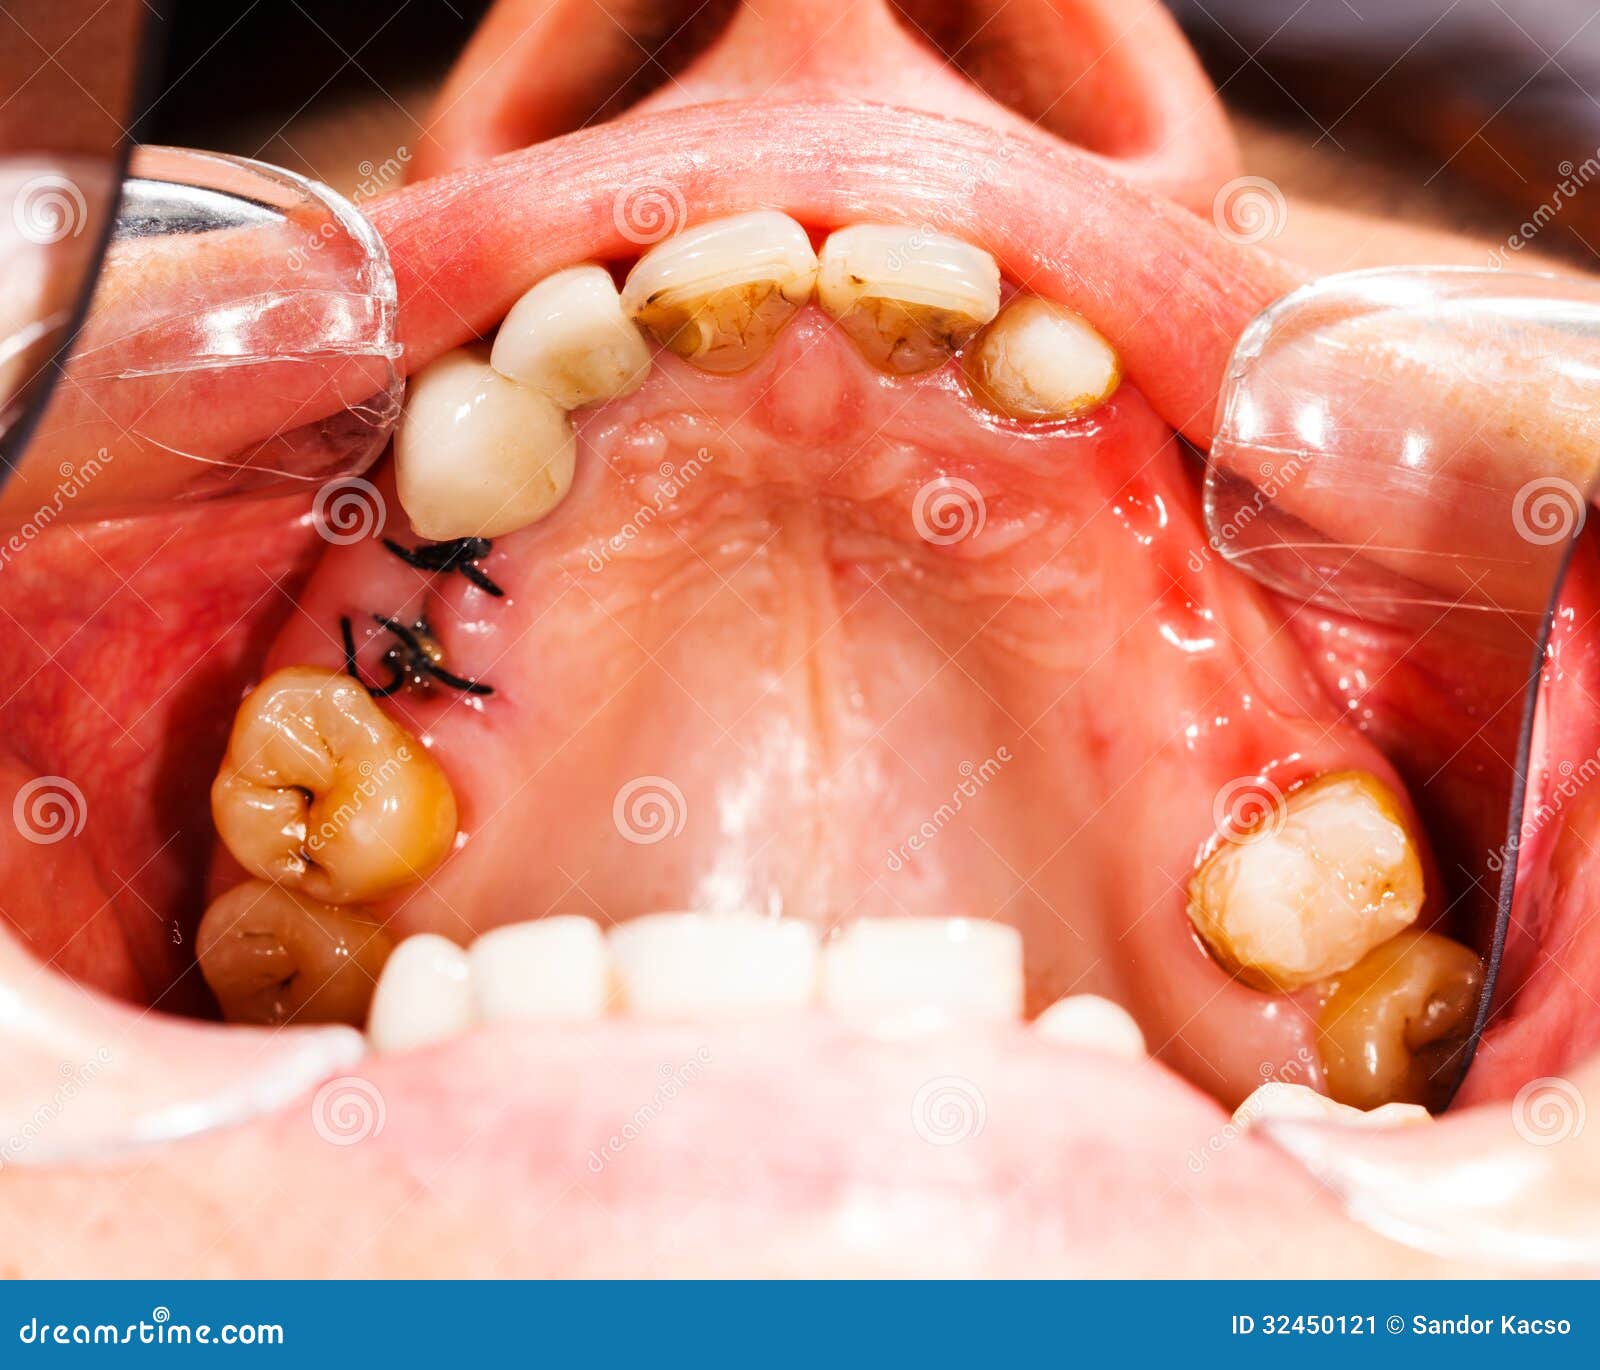 Why Do The Stitches In My Gums Hurt?